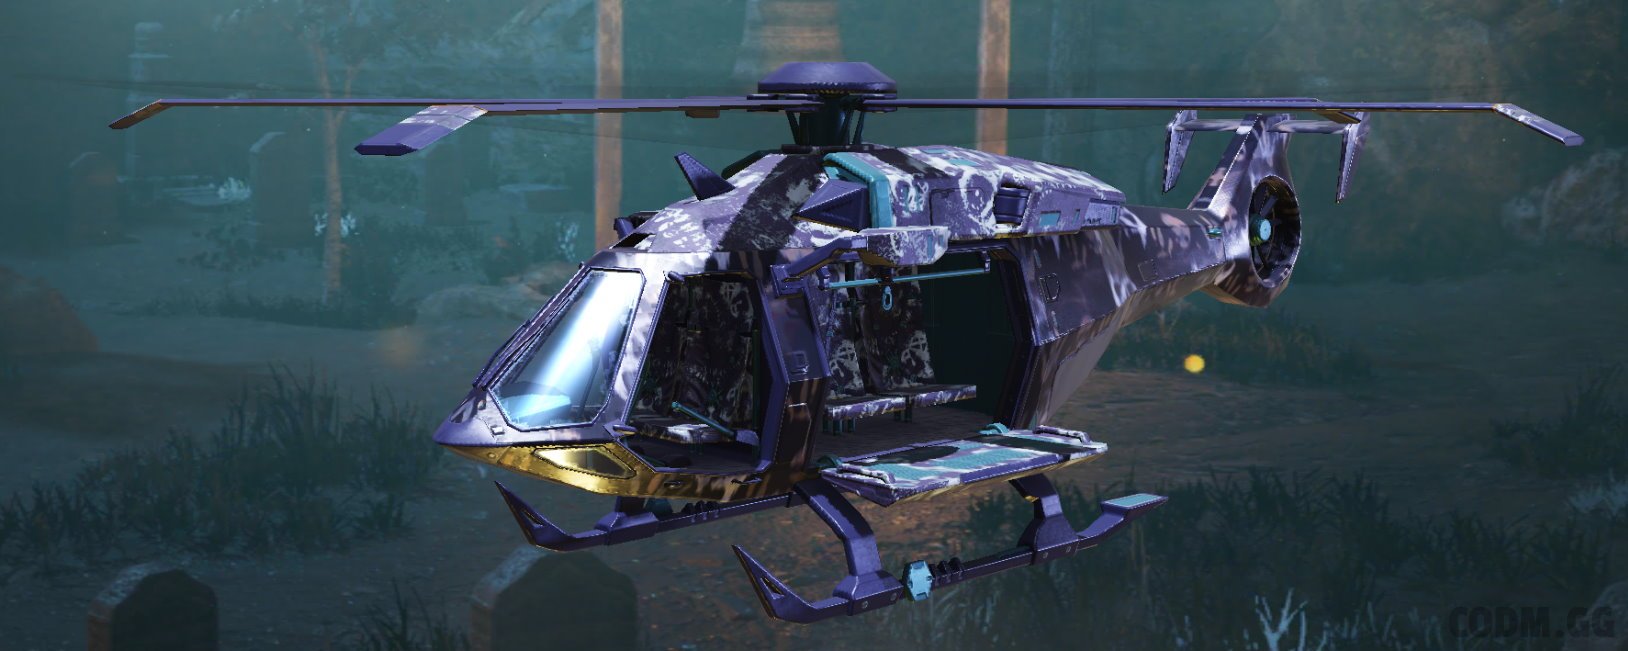 Helicopter Apparition, Rare camo in Call of Duty Mobile